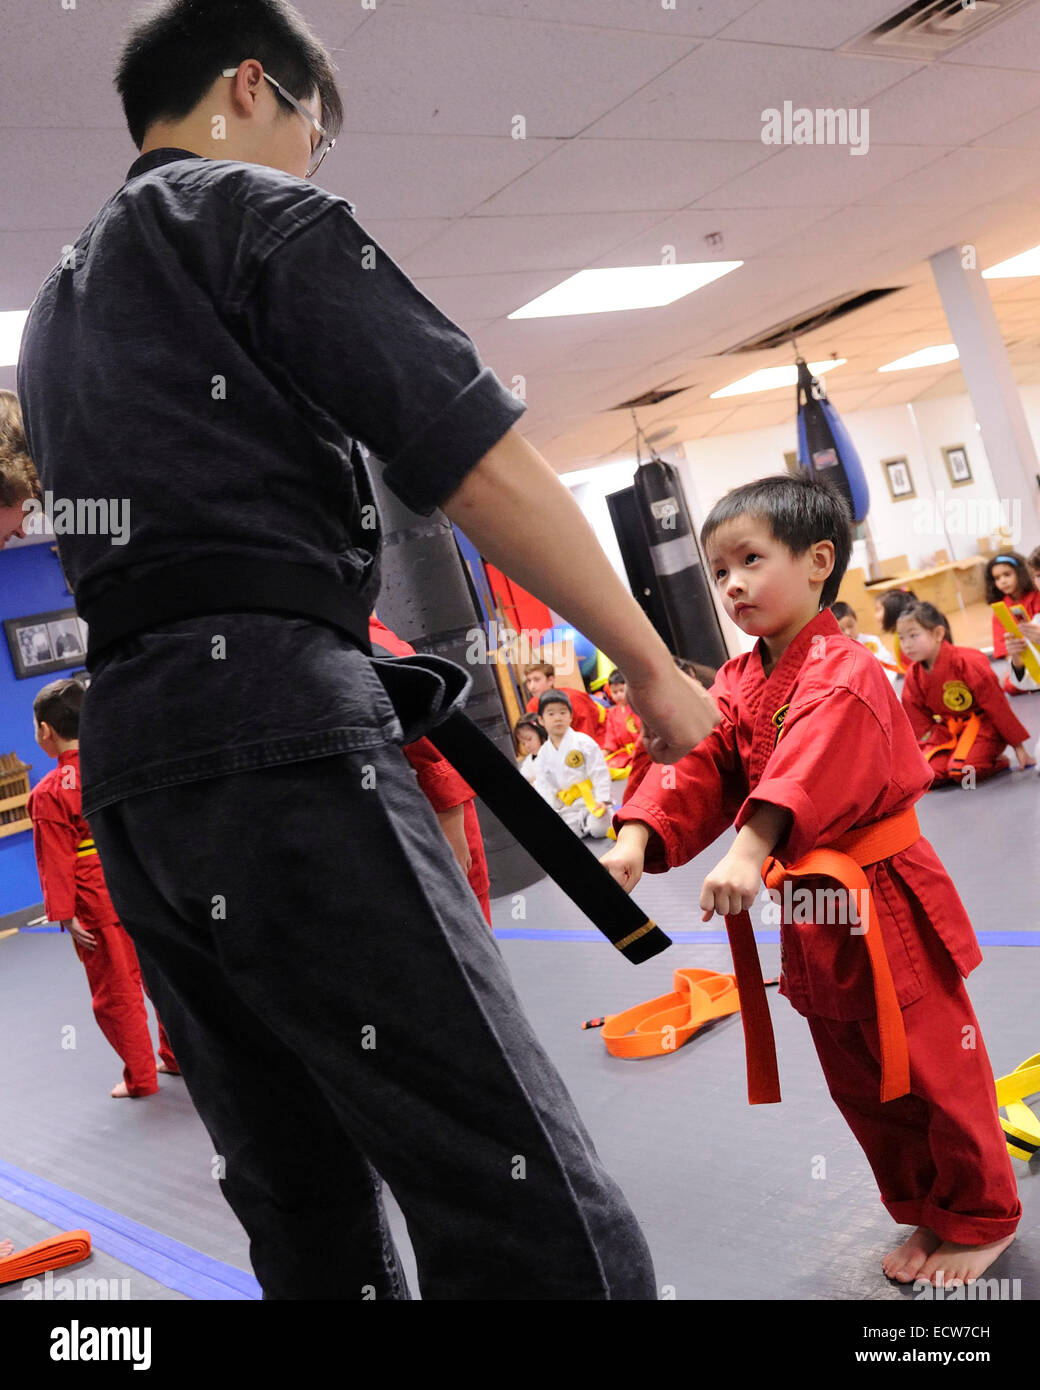 Toronto, Canada. 19th December 2014. 4 year old Brendan Chan attends a Karate Belt Graduation where he receives his Orange Belt. Brendan has been attending Karate training for 6 months. Credit:  EXImages/Alamy Live News Stock Photo